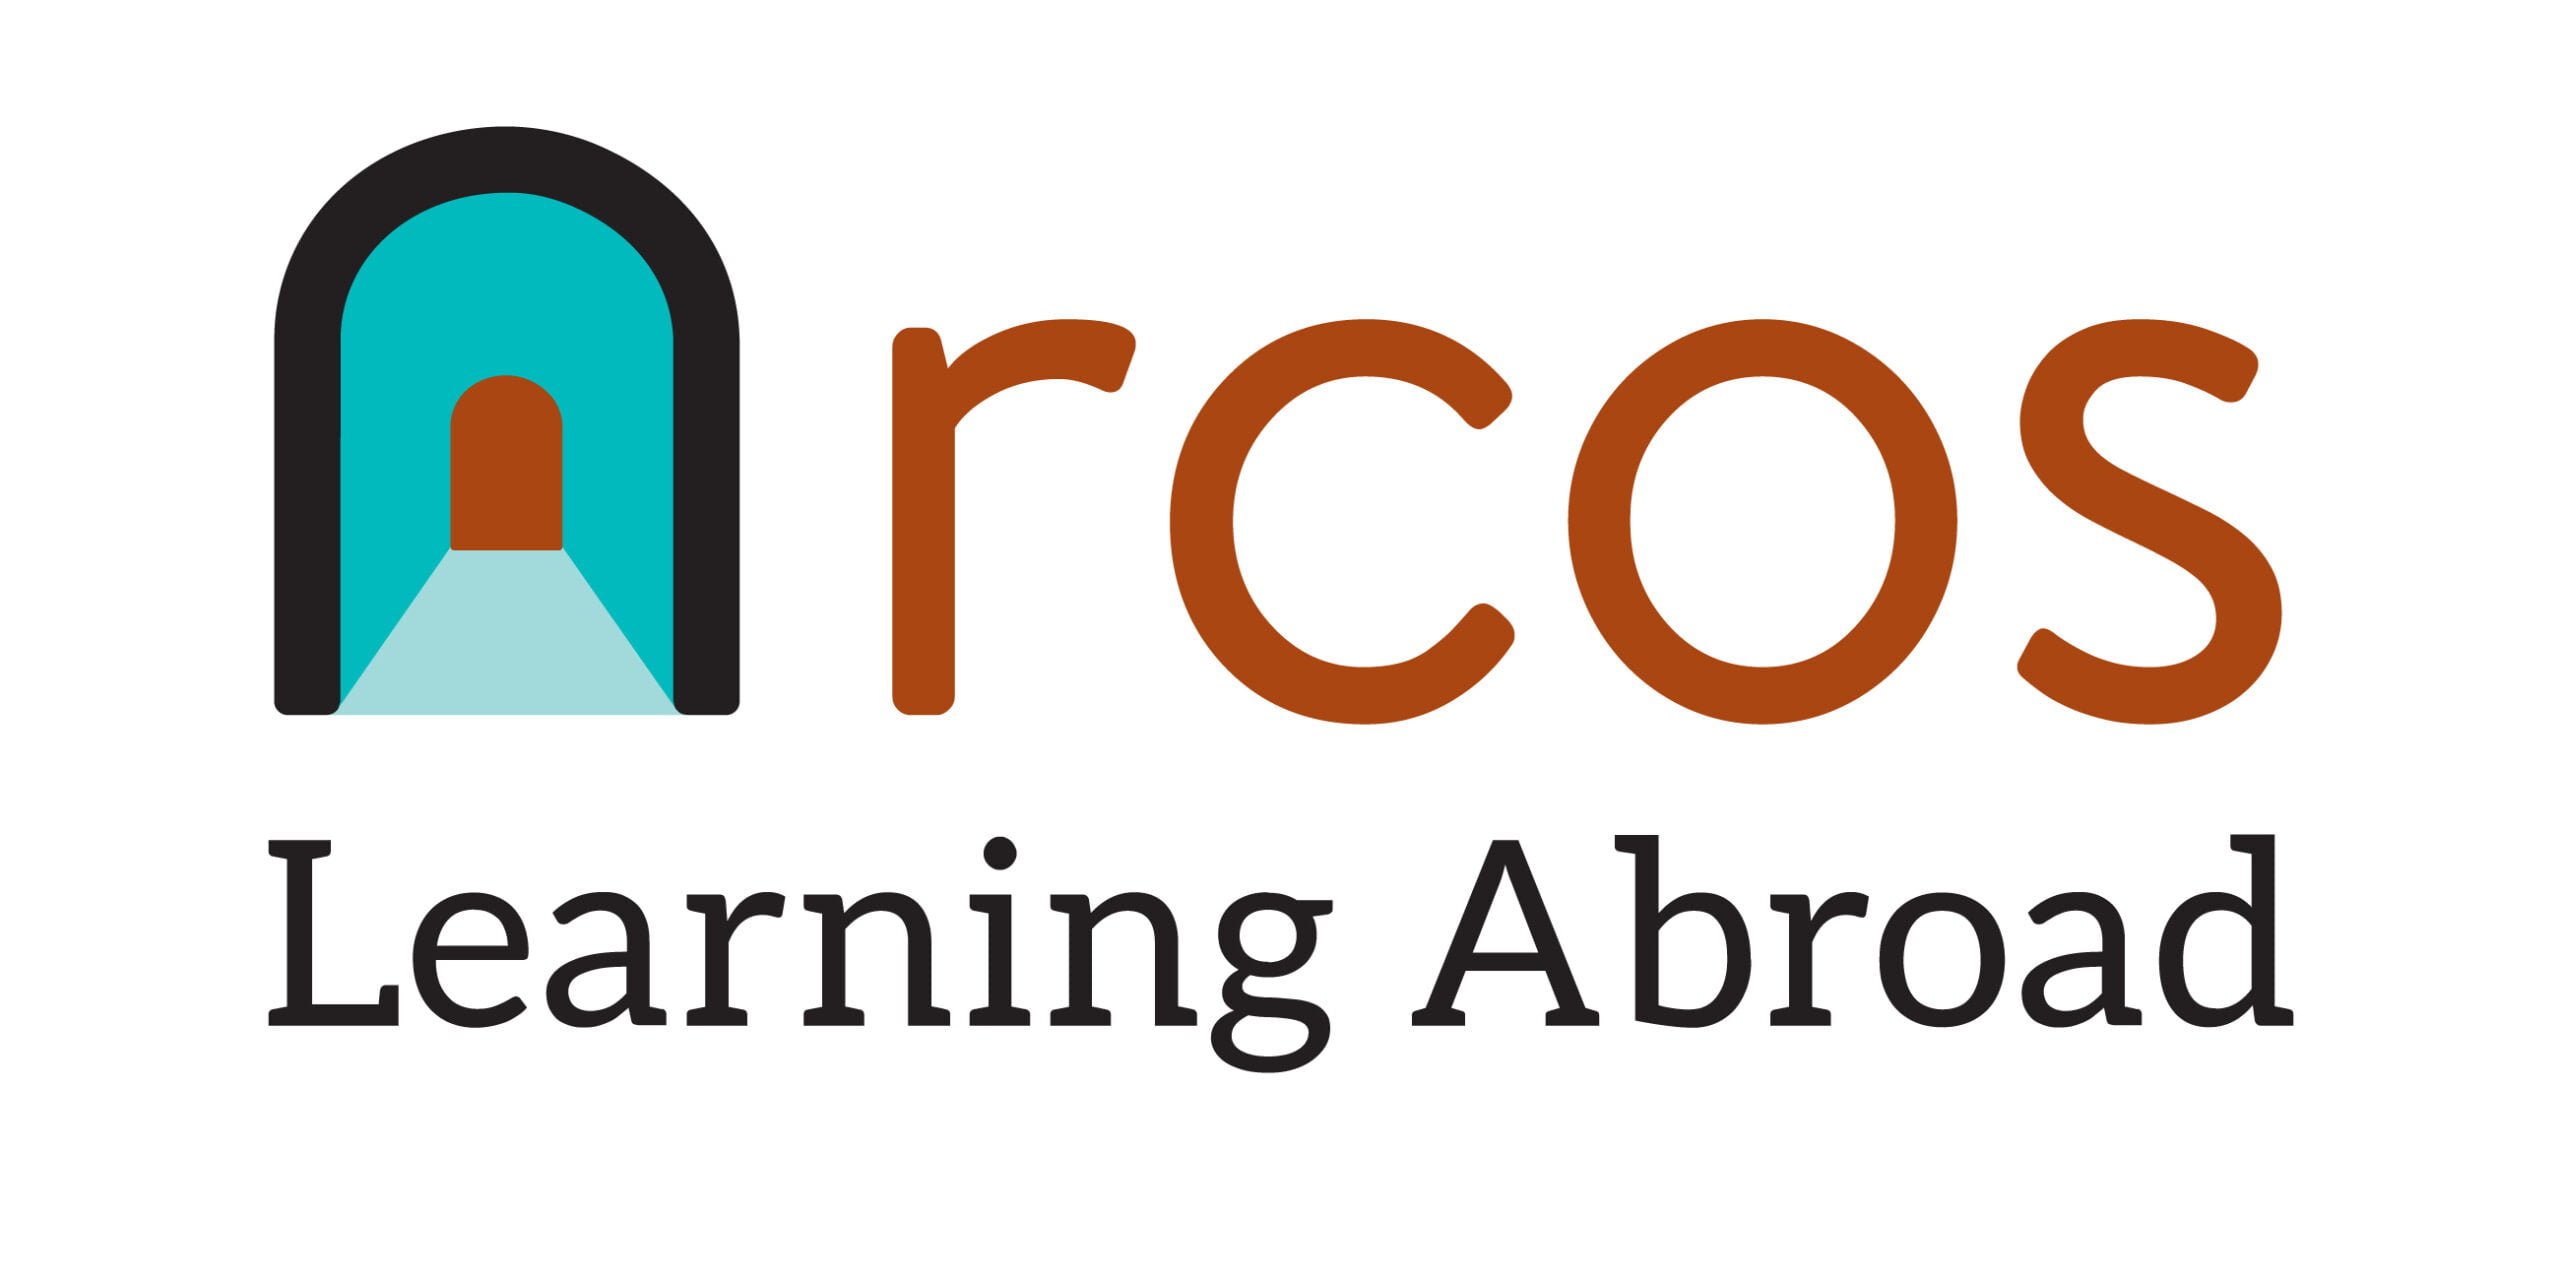 Arcos Learning Abroad